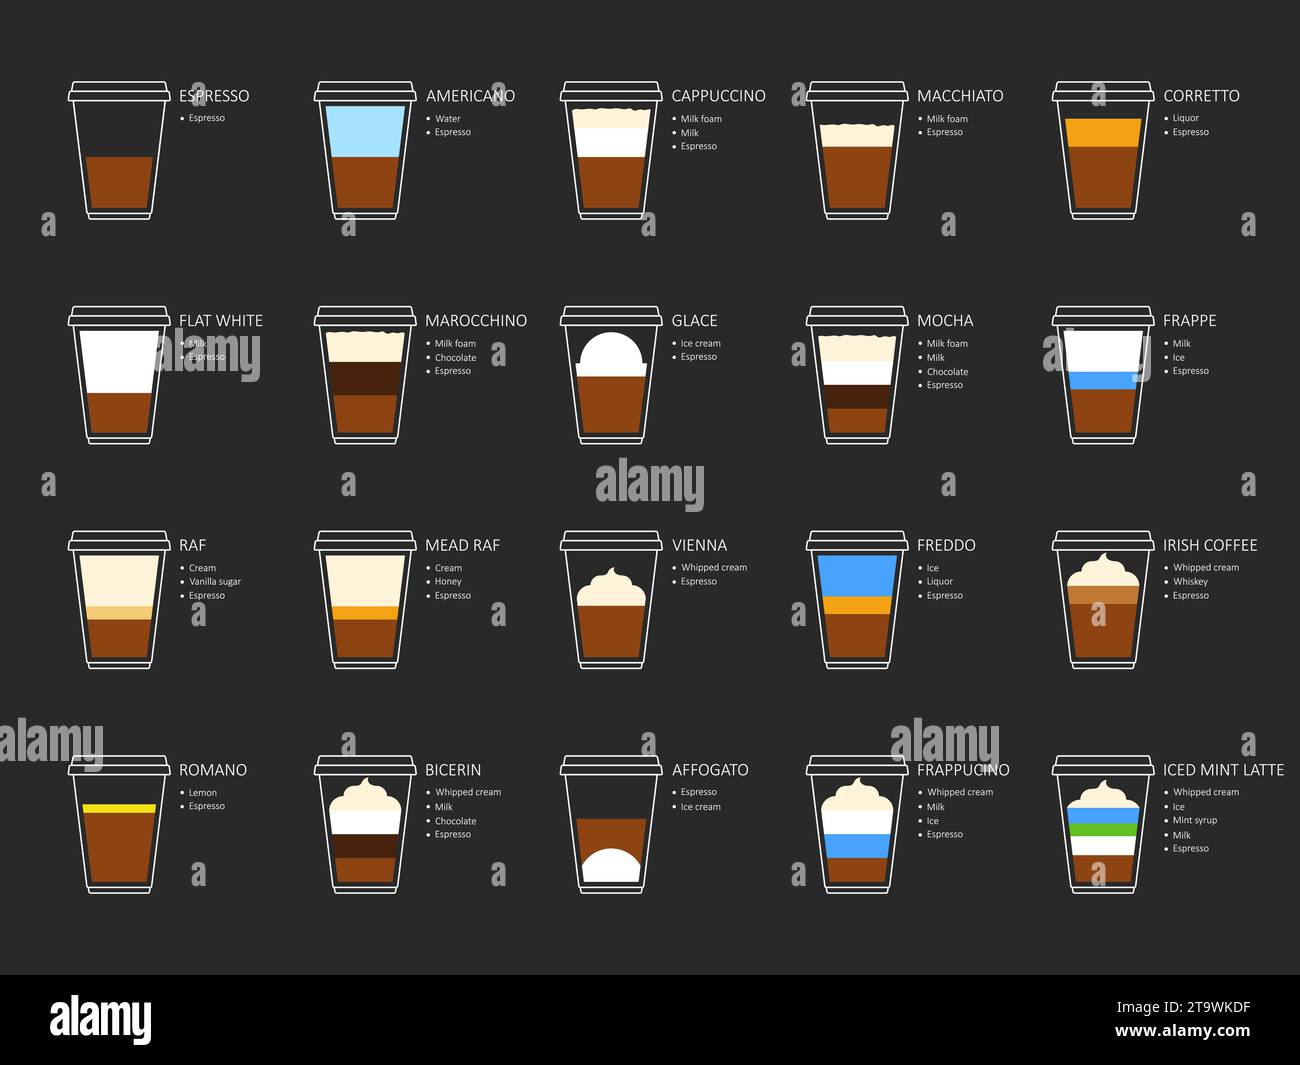 Types of coffee recipes with ingredients and products. Infographic of coffee types and their preparation for cafe, restaurant, coffeehouse, shop. Stock Vector